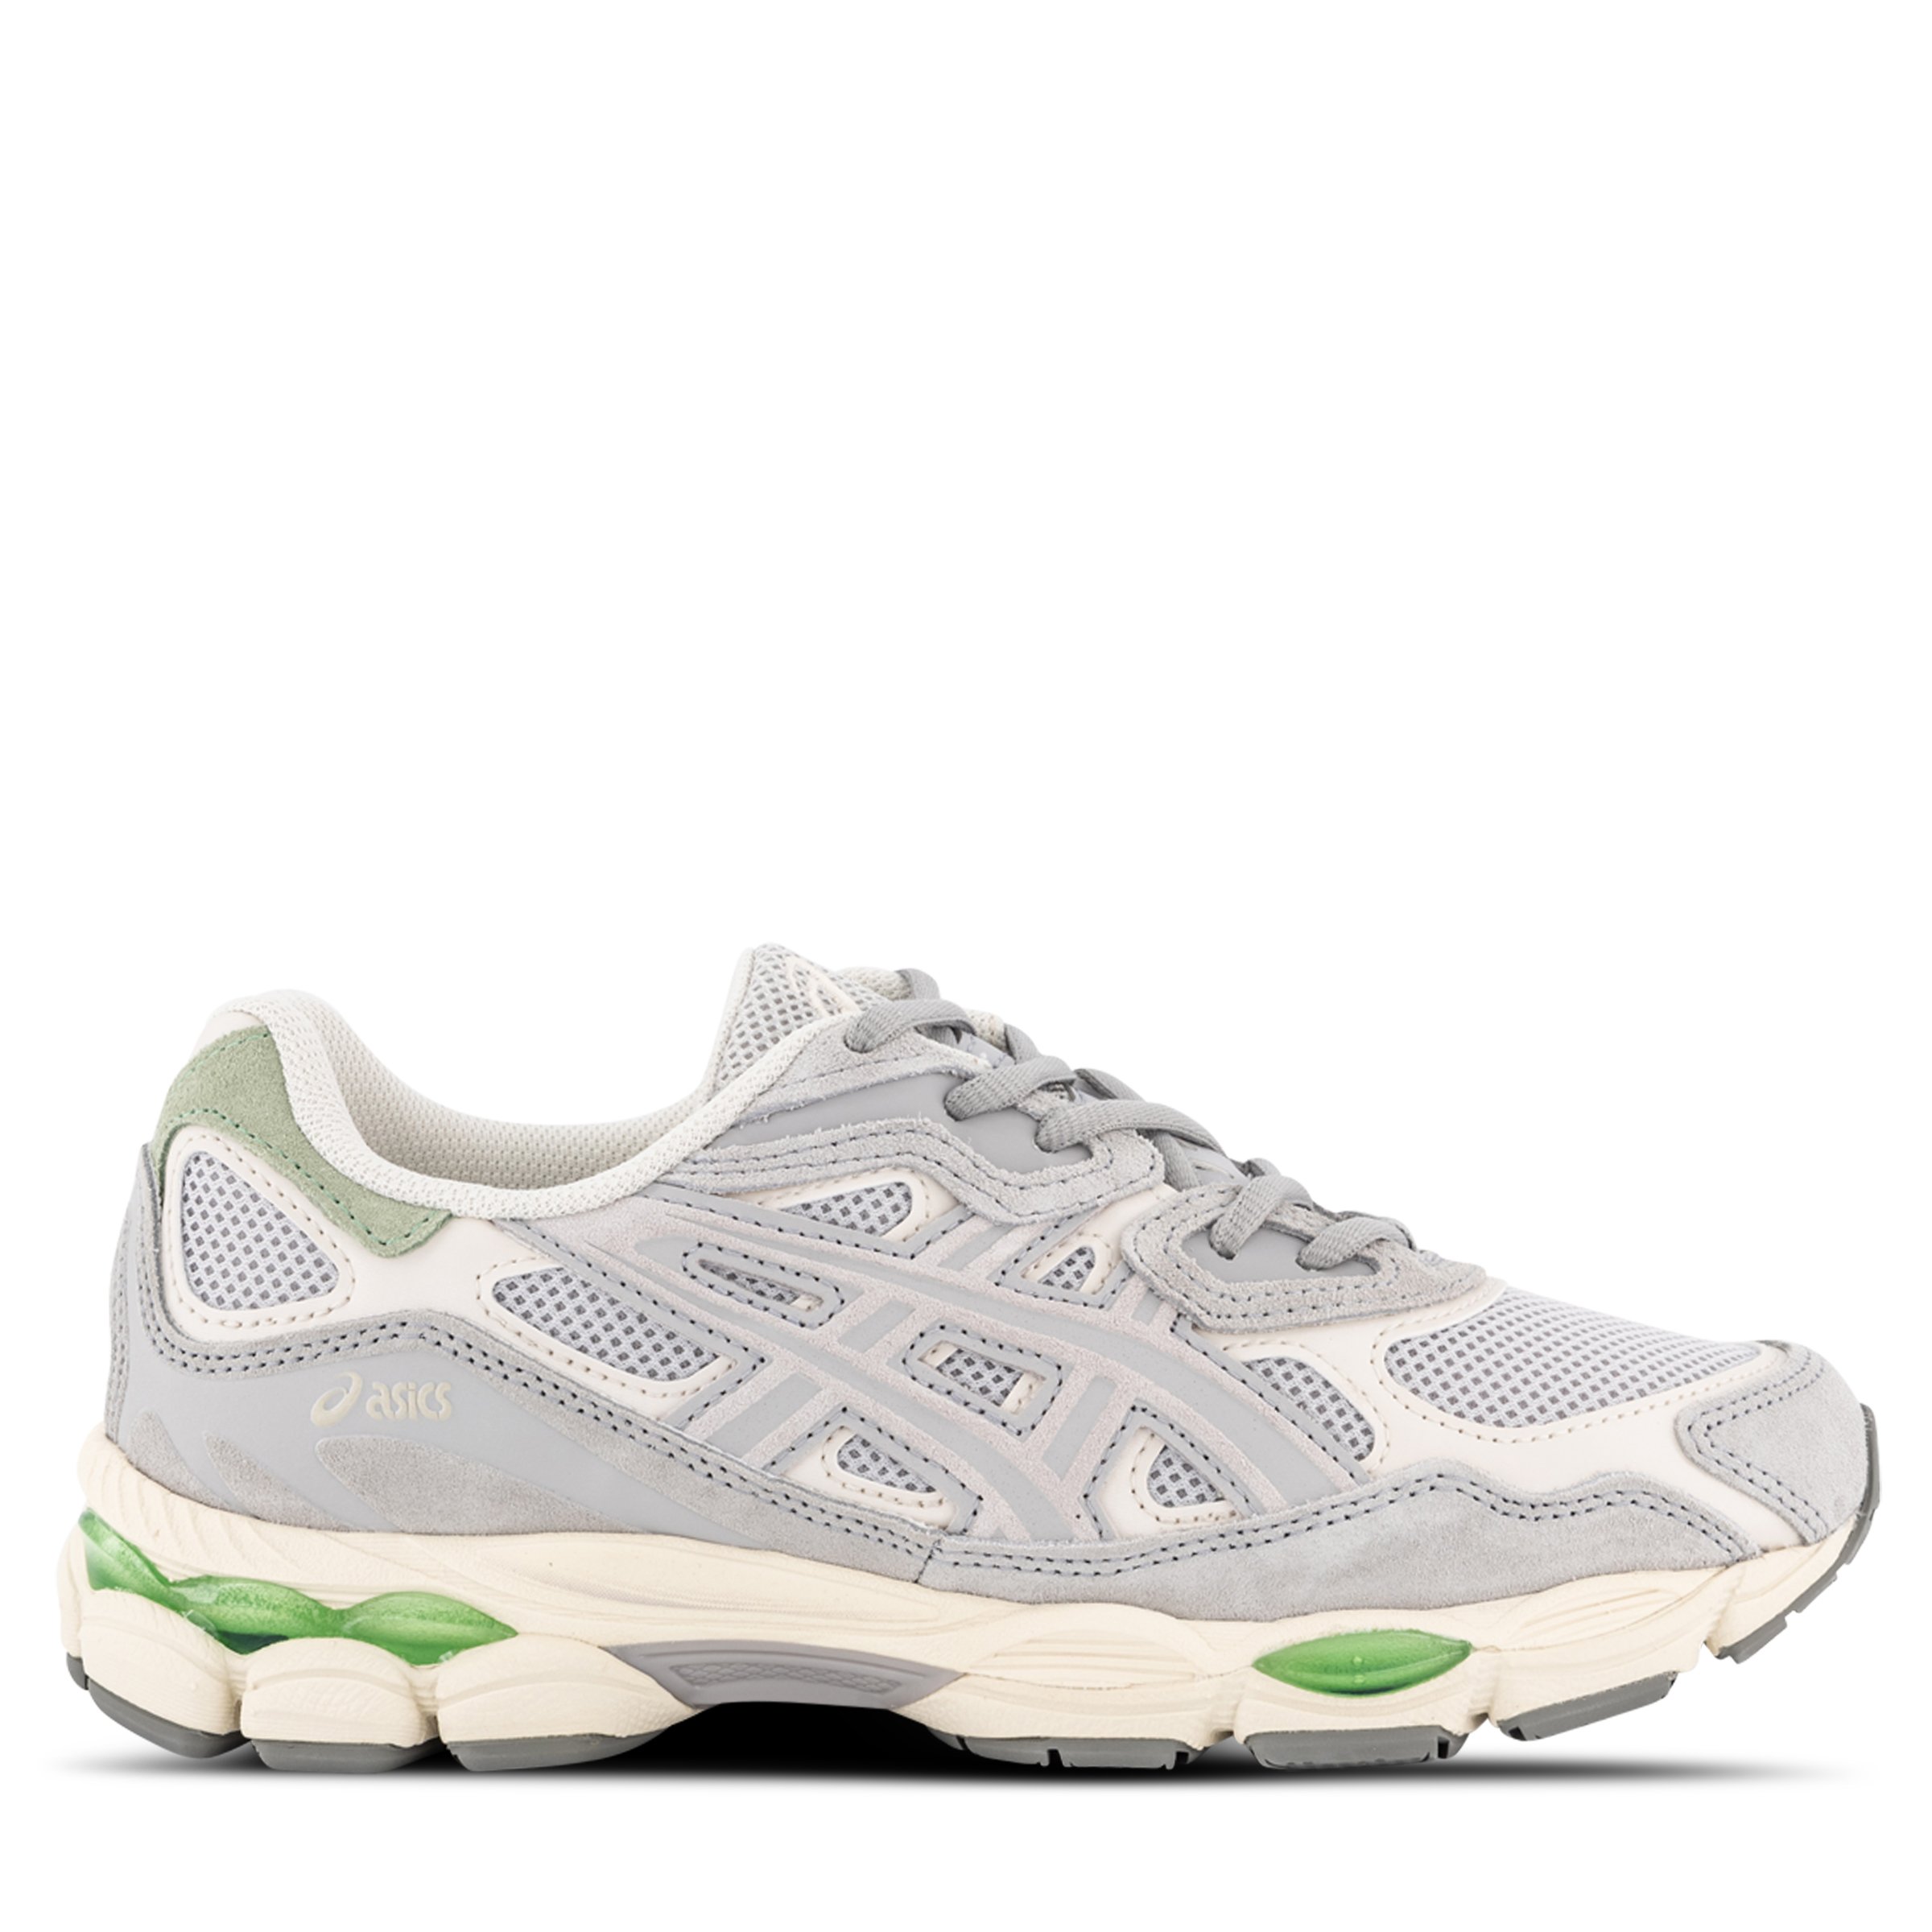 ASICS GEL-NYC White/Oyster Grey 1201A789-105